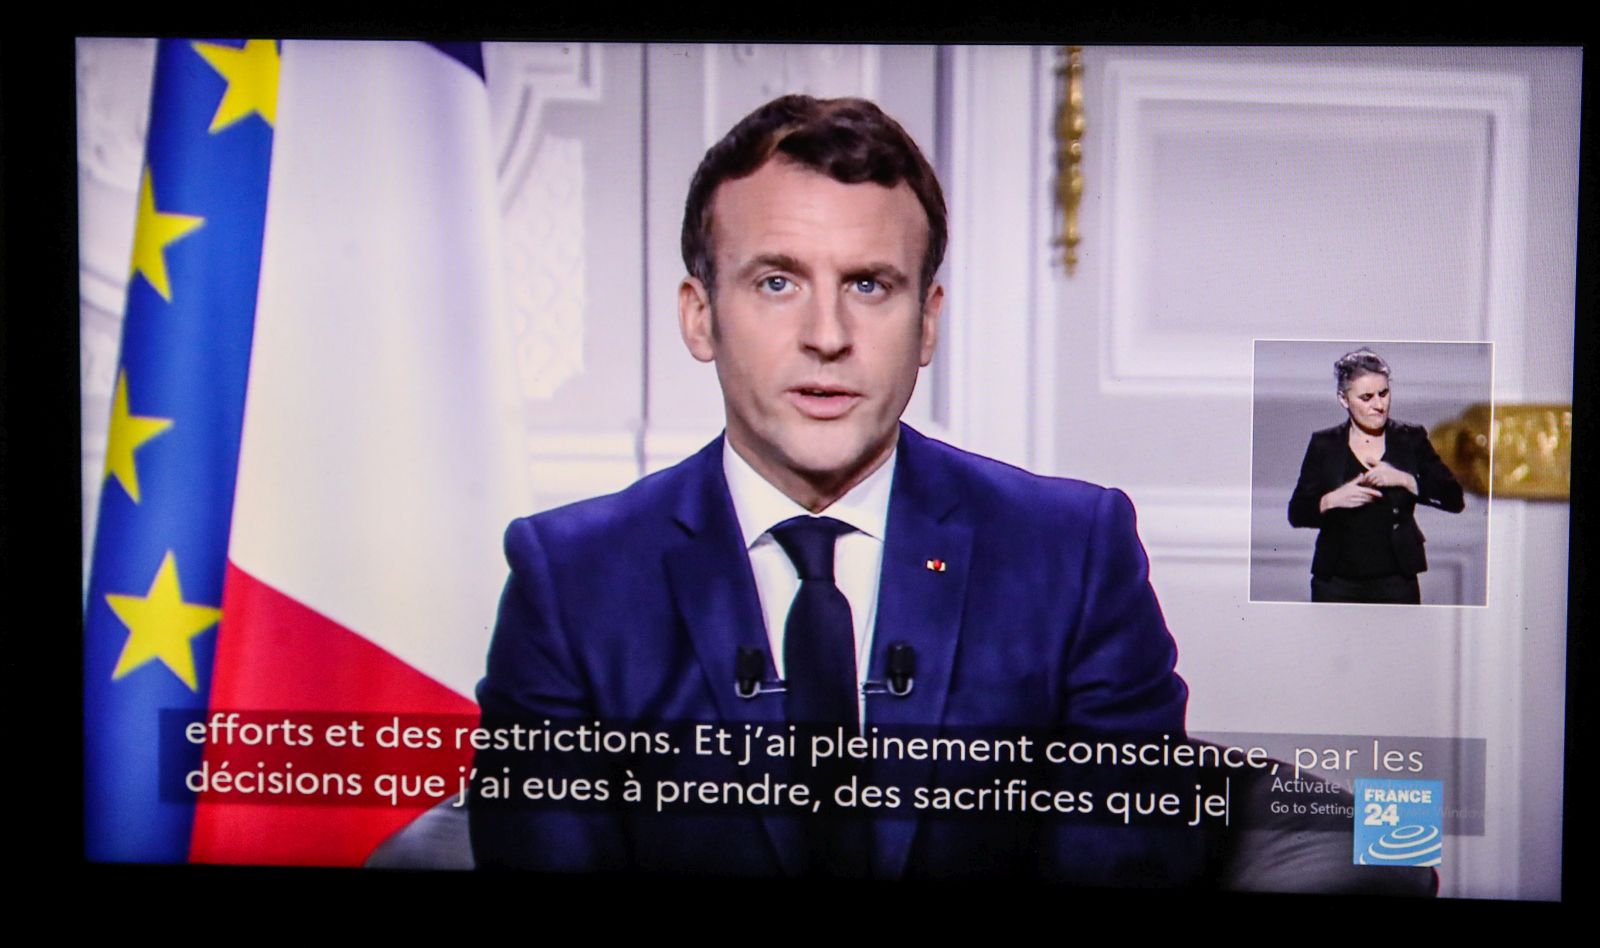 epa08912999 A screen displays French President Emmanuel Macron delivering his New Year wishes for the year 2021 to the French, in Paris, France, 31 December 2020.  EPA/Mohammed Badra